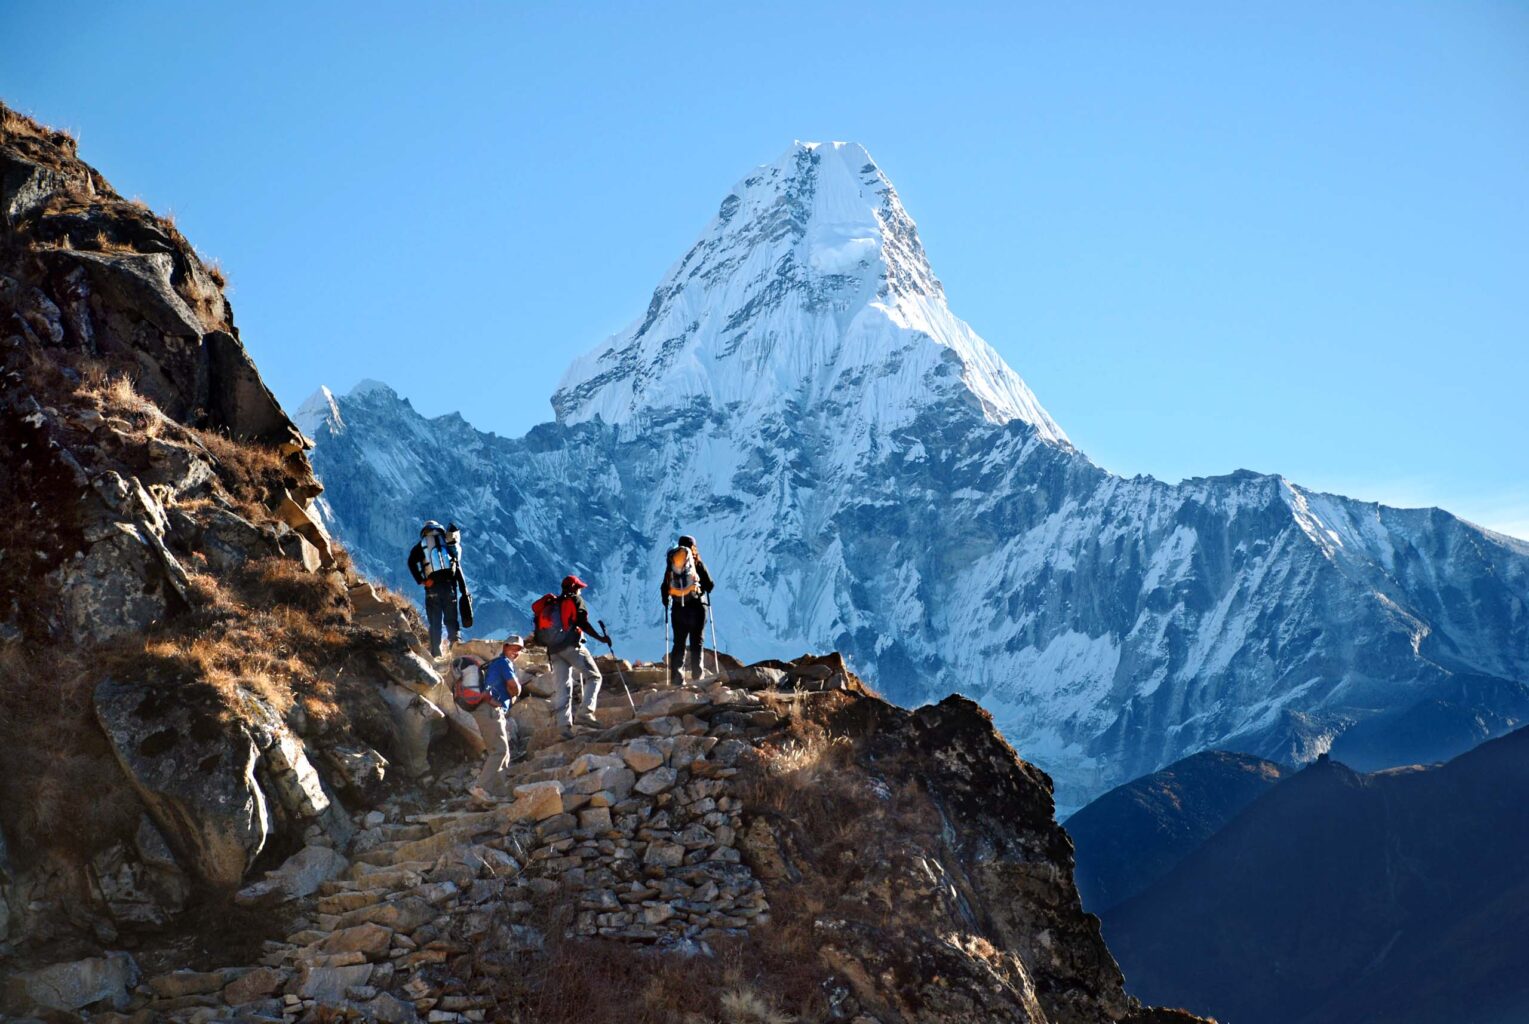 Hikers in the mountains in Nepal.